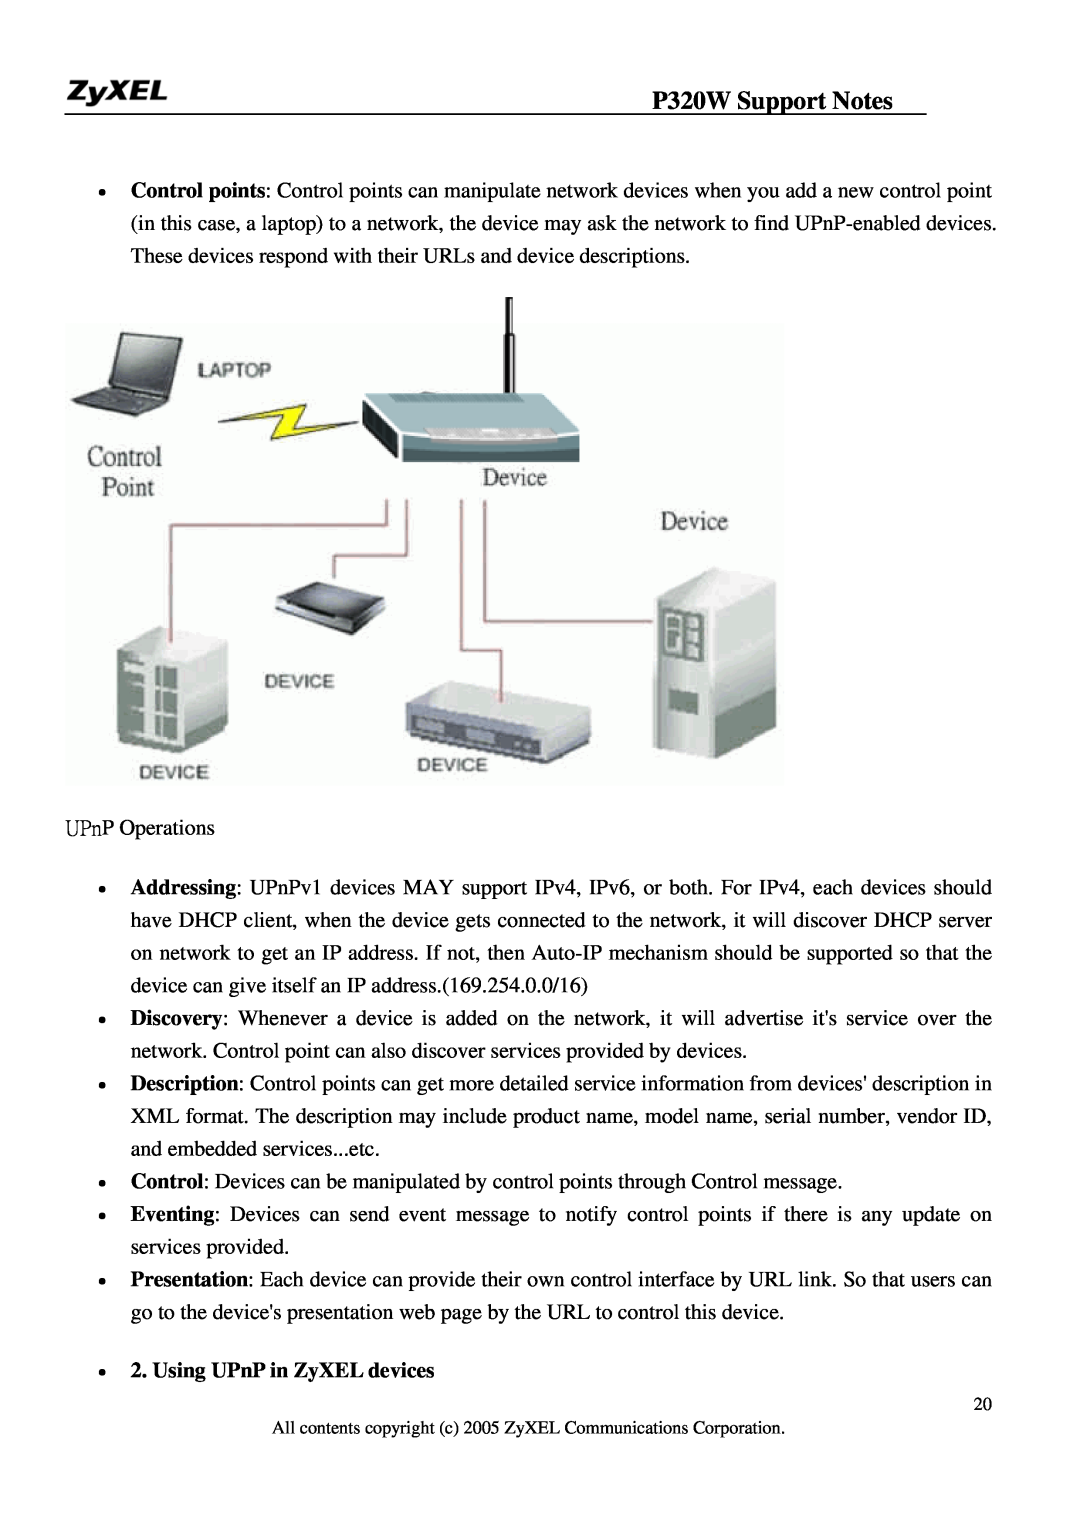 ZyXEL Communications manual Using UPnP in ZyXEL devices, P320W Support Notes 